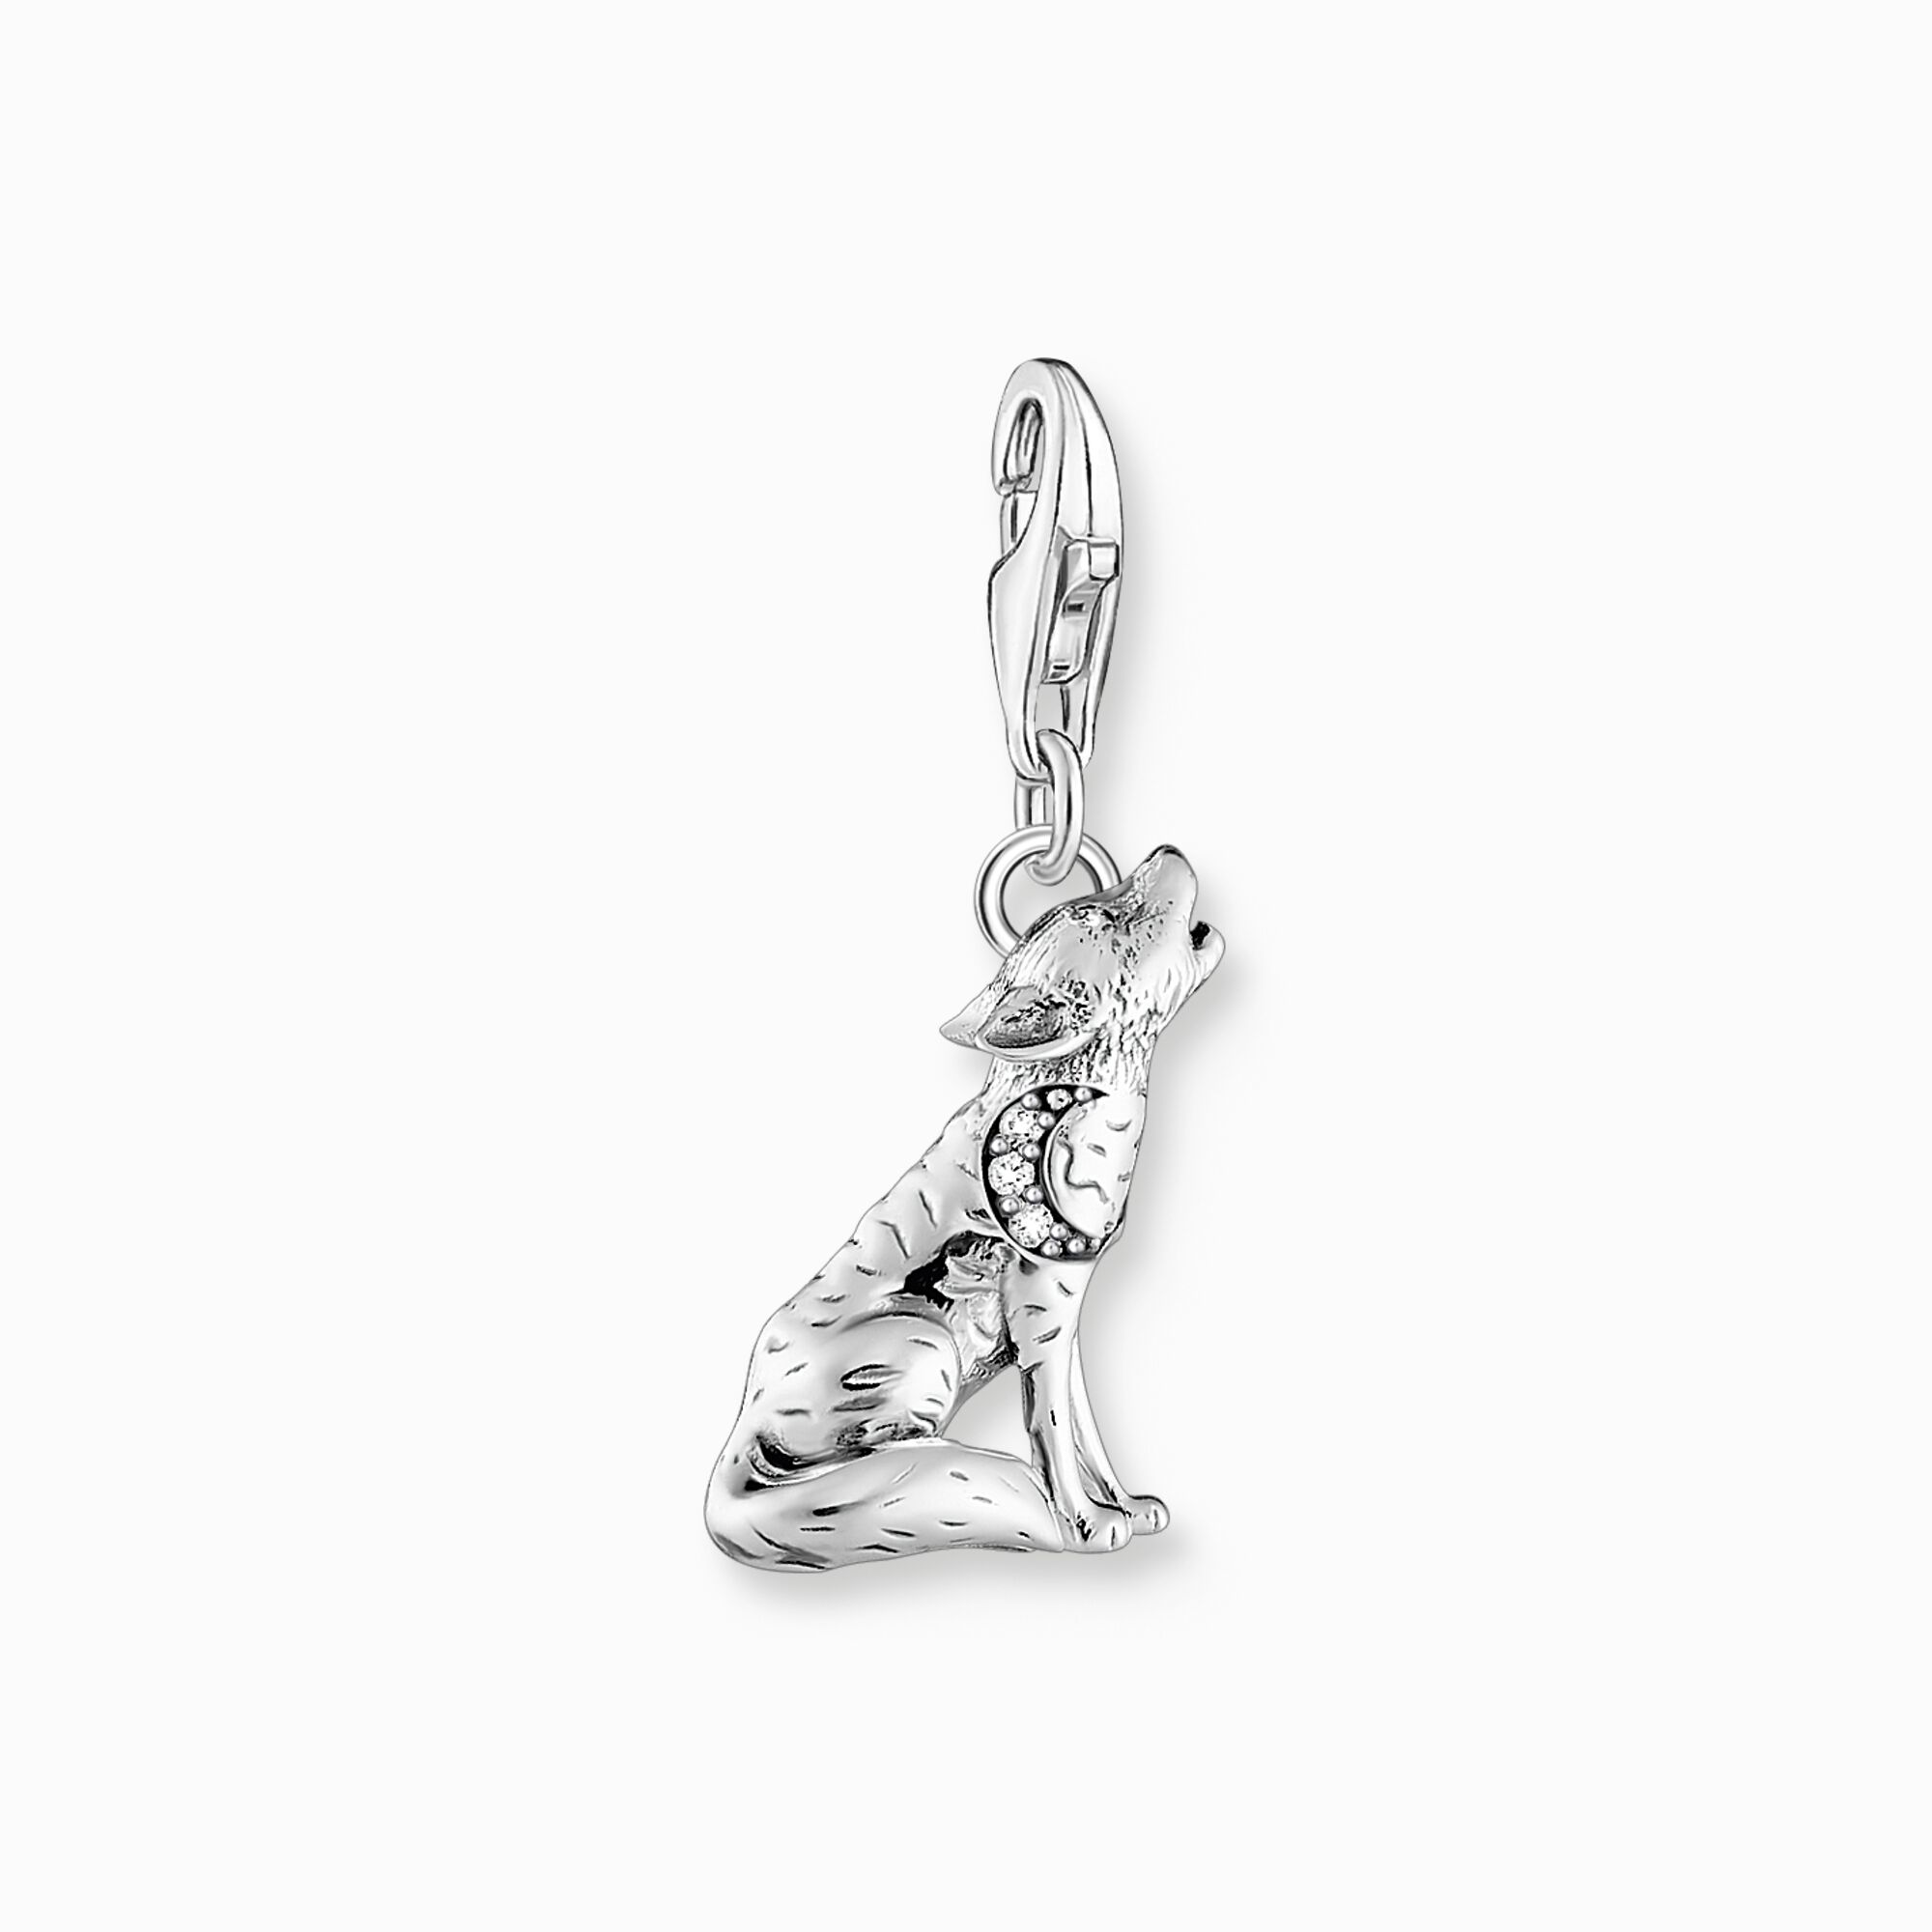 Silver blackened charm pendant three-dimensional wolf from the Charm Club collection in the THOMAS SABO online store